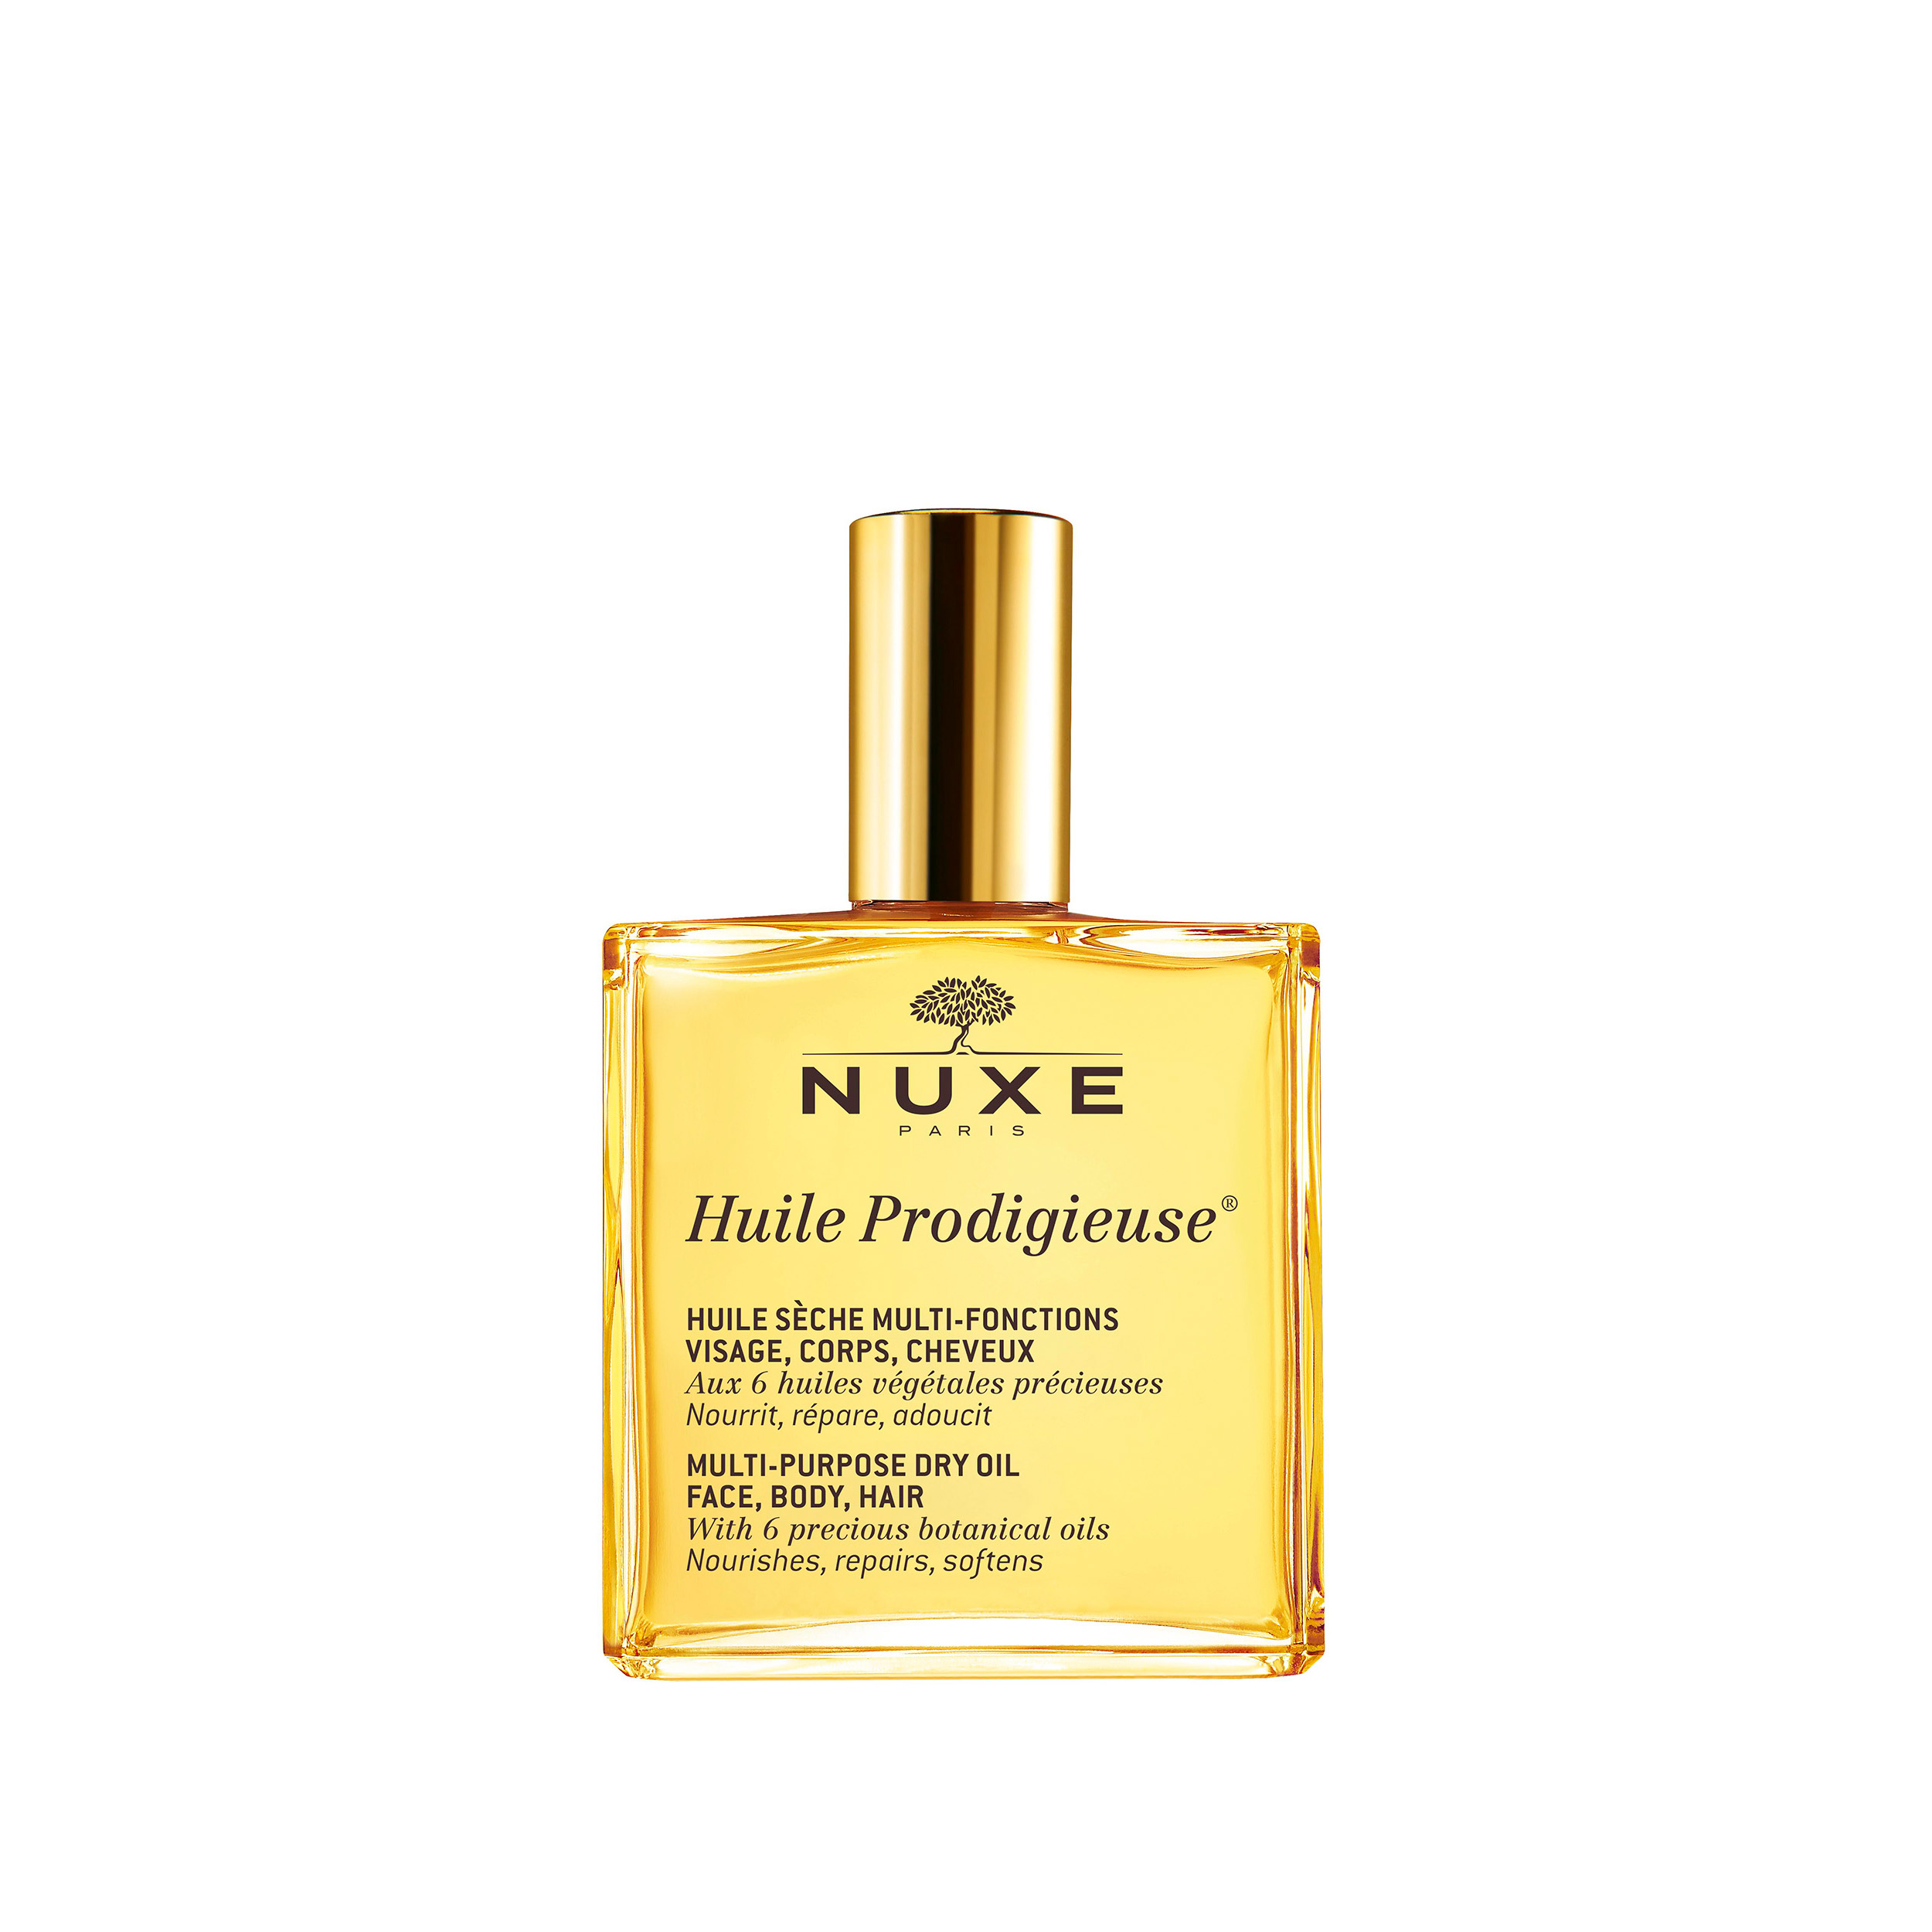 NUXE NUXE Сухое масло для лица, тела и волос «Huile Prodigieuse» 100 мл от Foambox